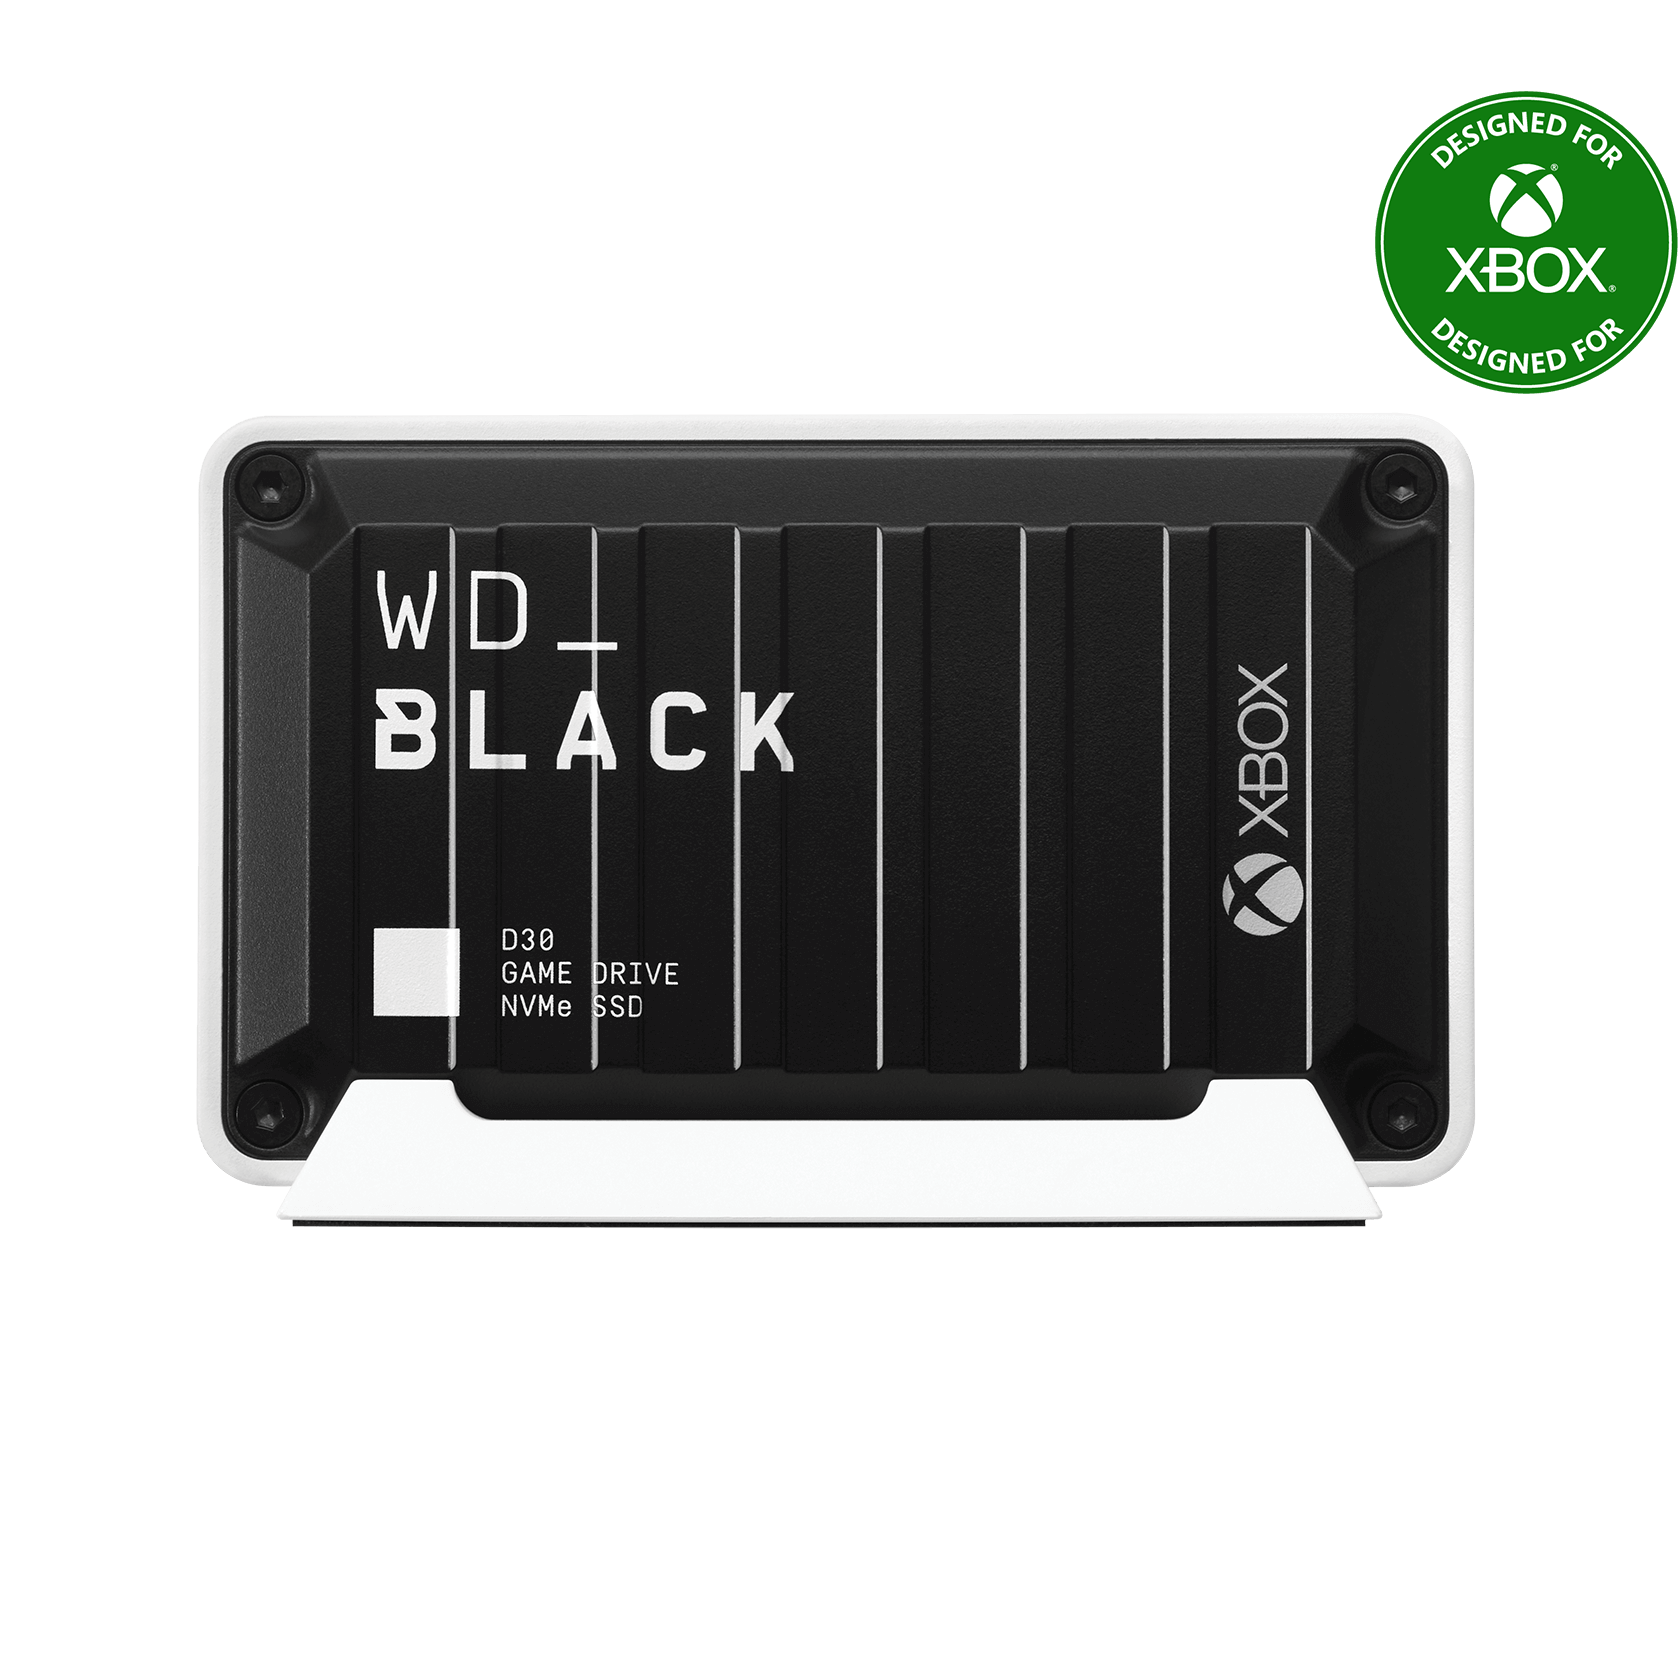 WD Black 2TB WD_Black™ D30 Game Drive for Xbox™ - - WDBAMF0020BBW-WESN